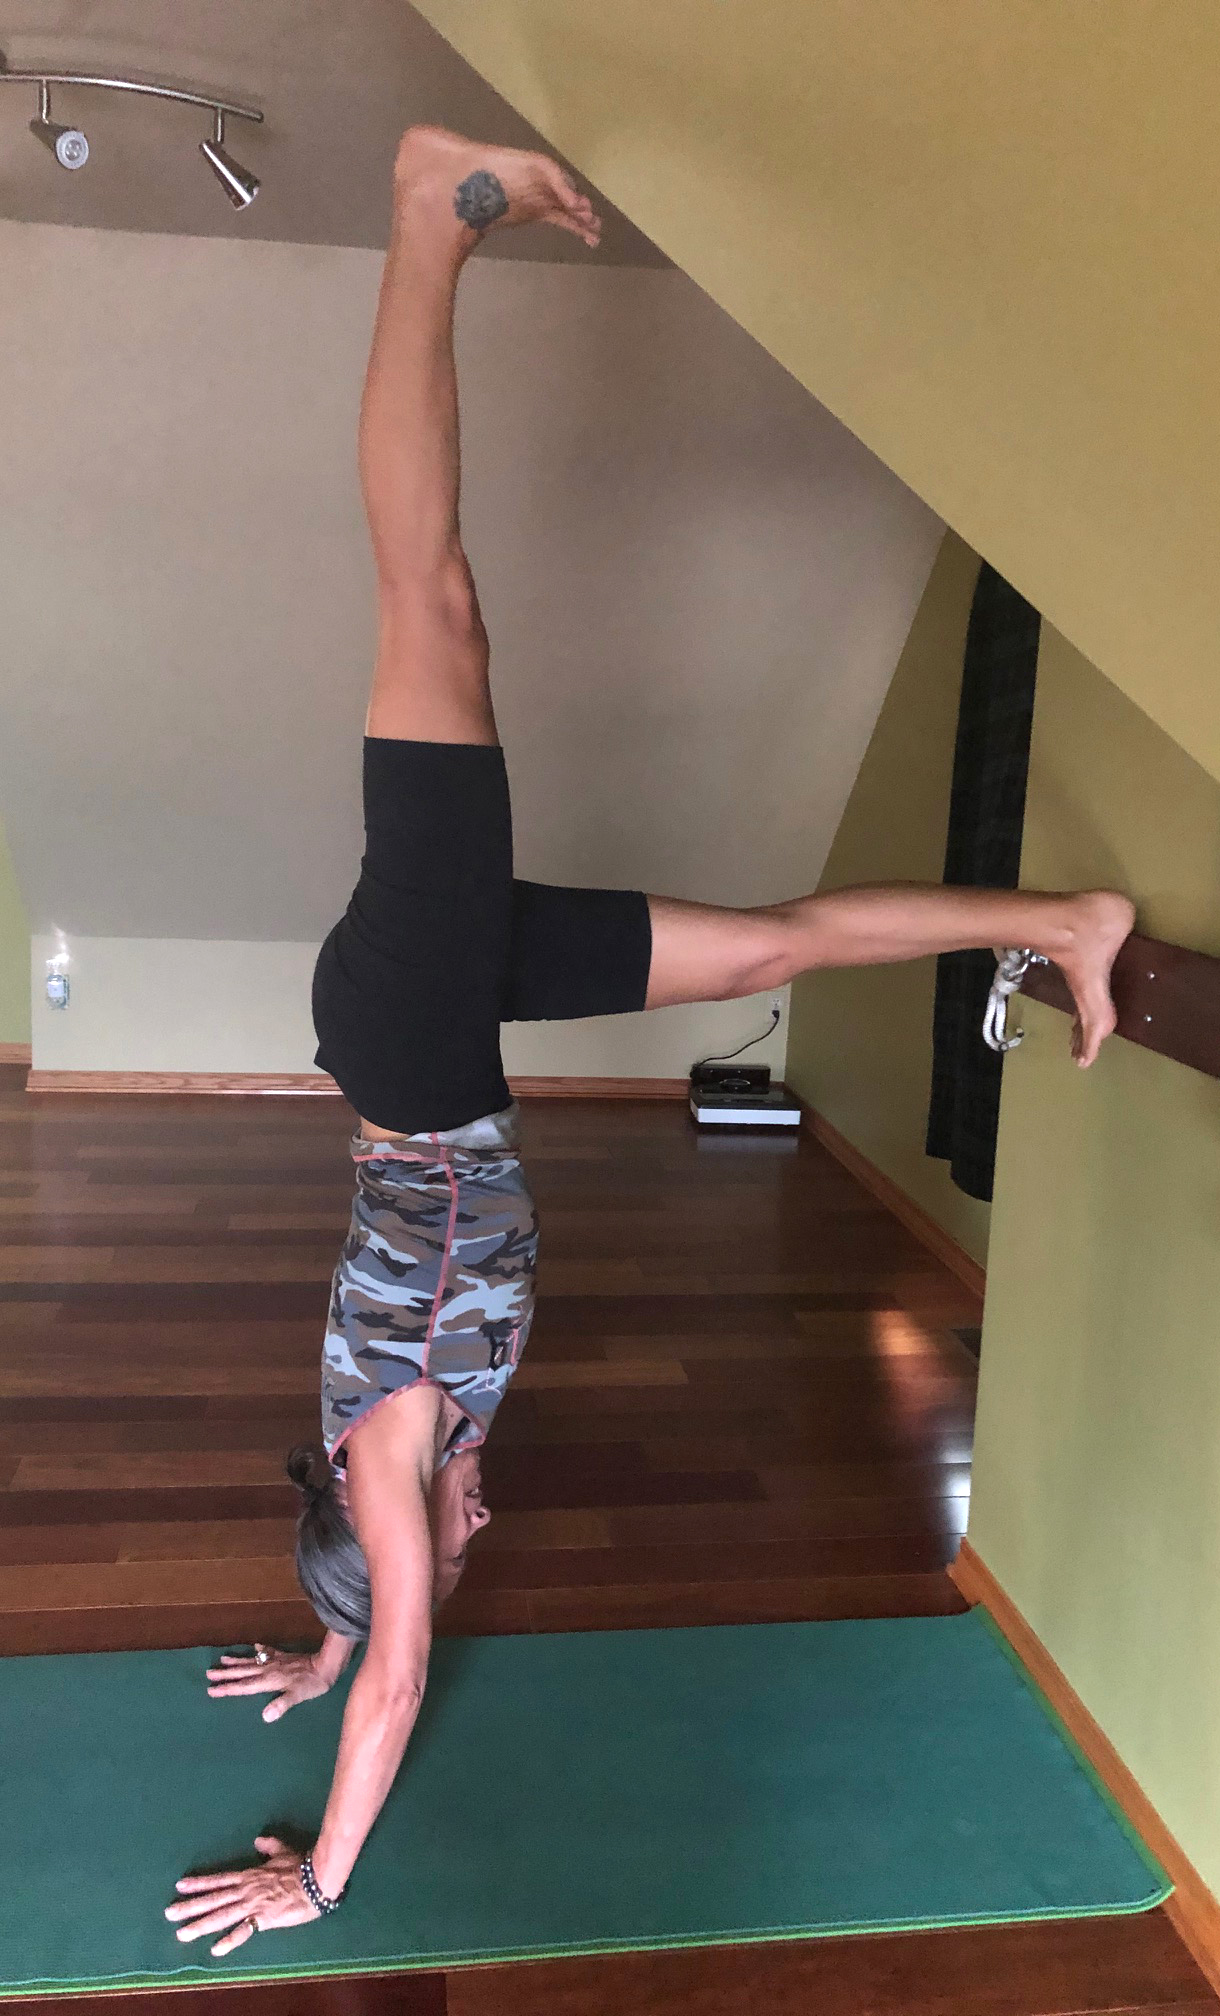 Handstand: How to Practice Adho Mukha Vrksasana